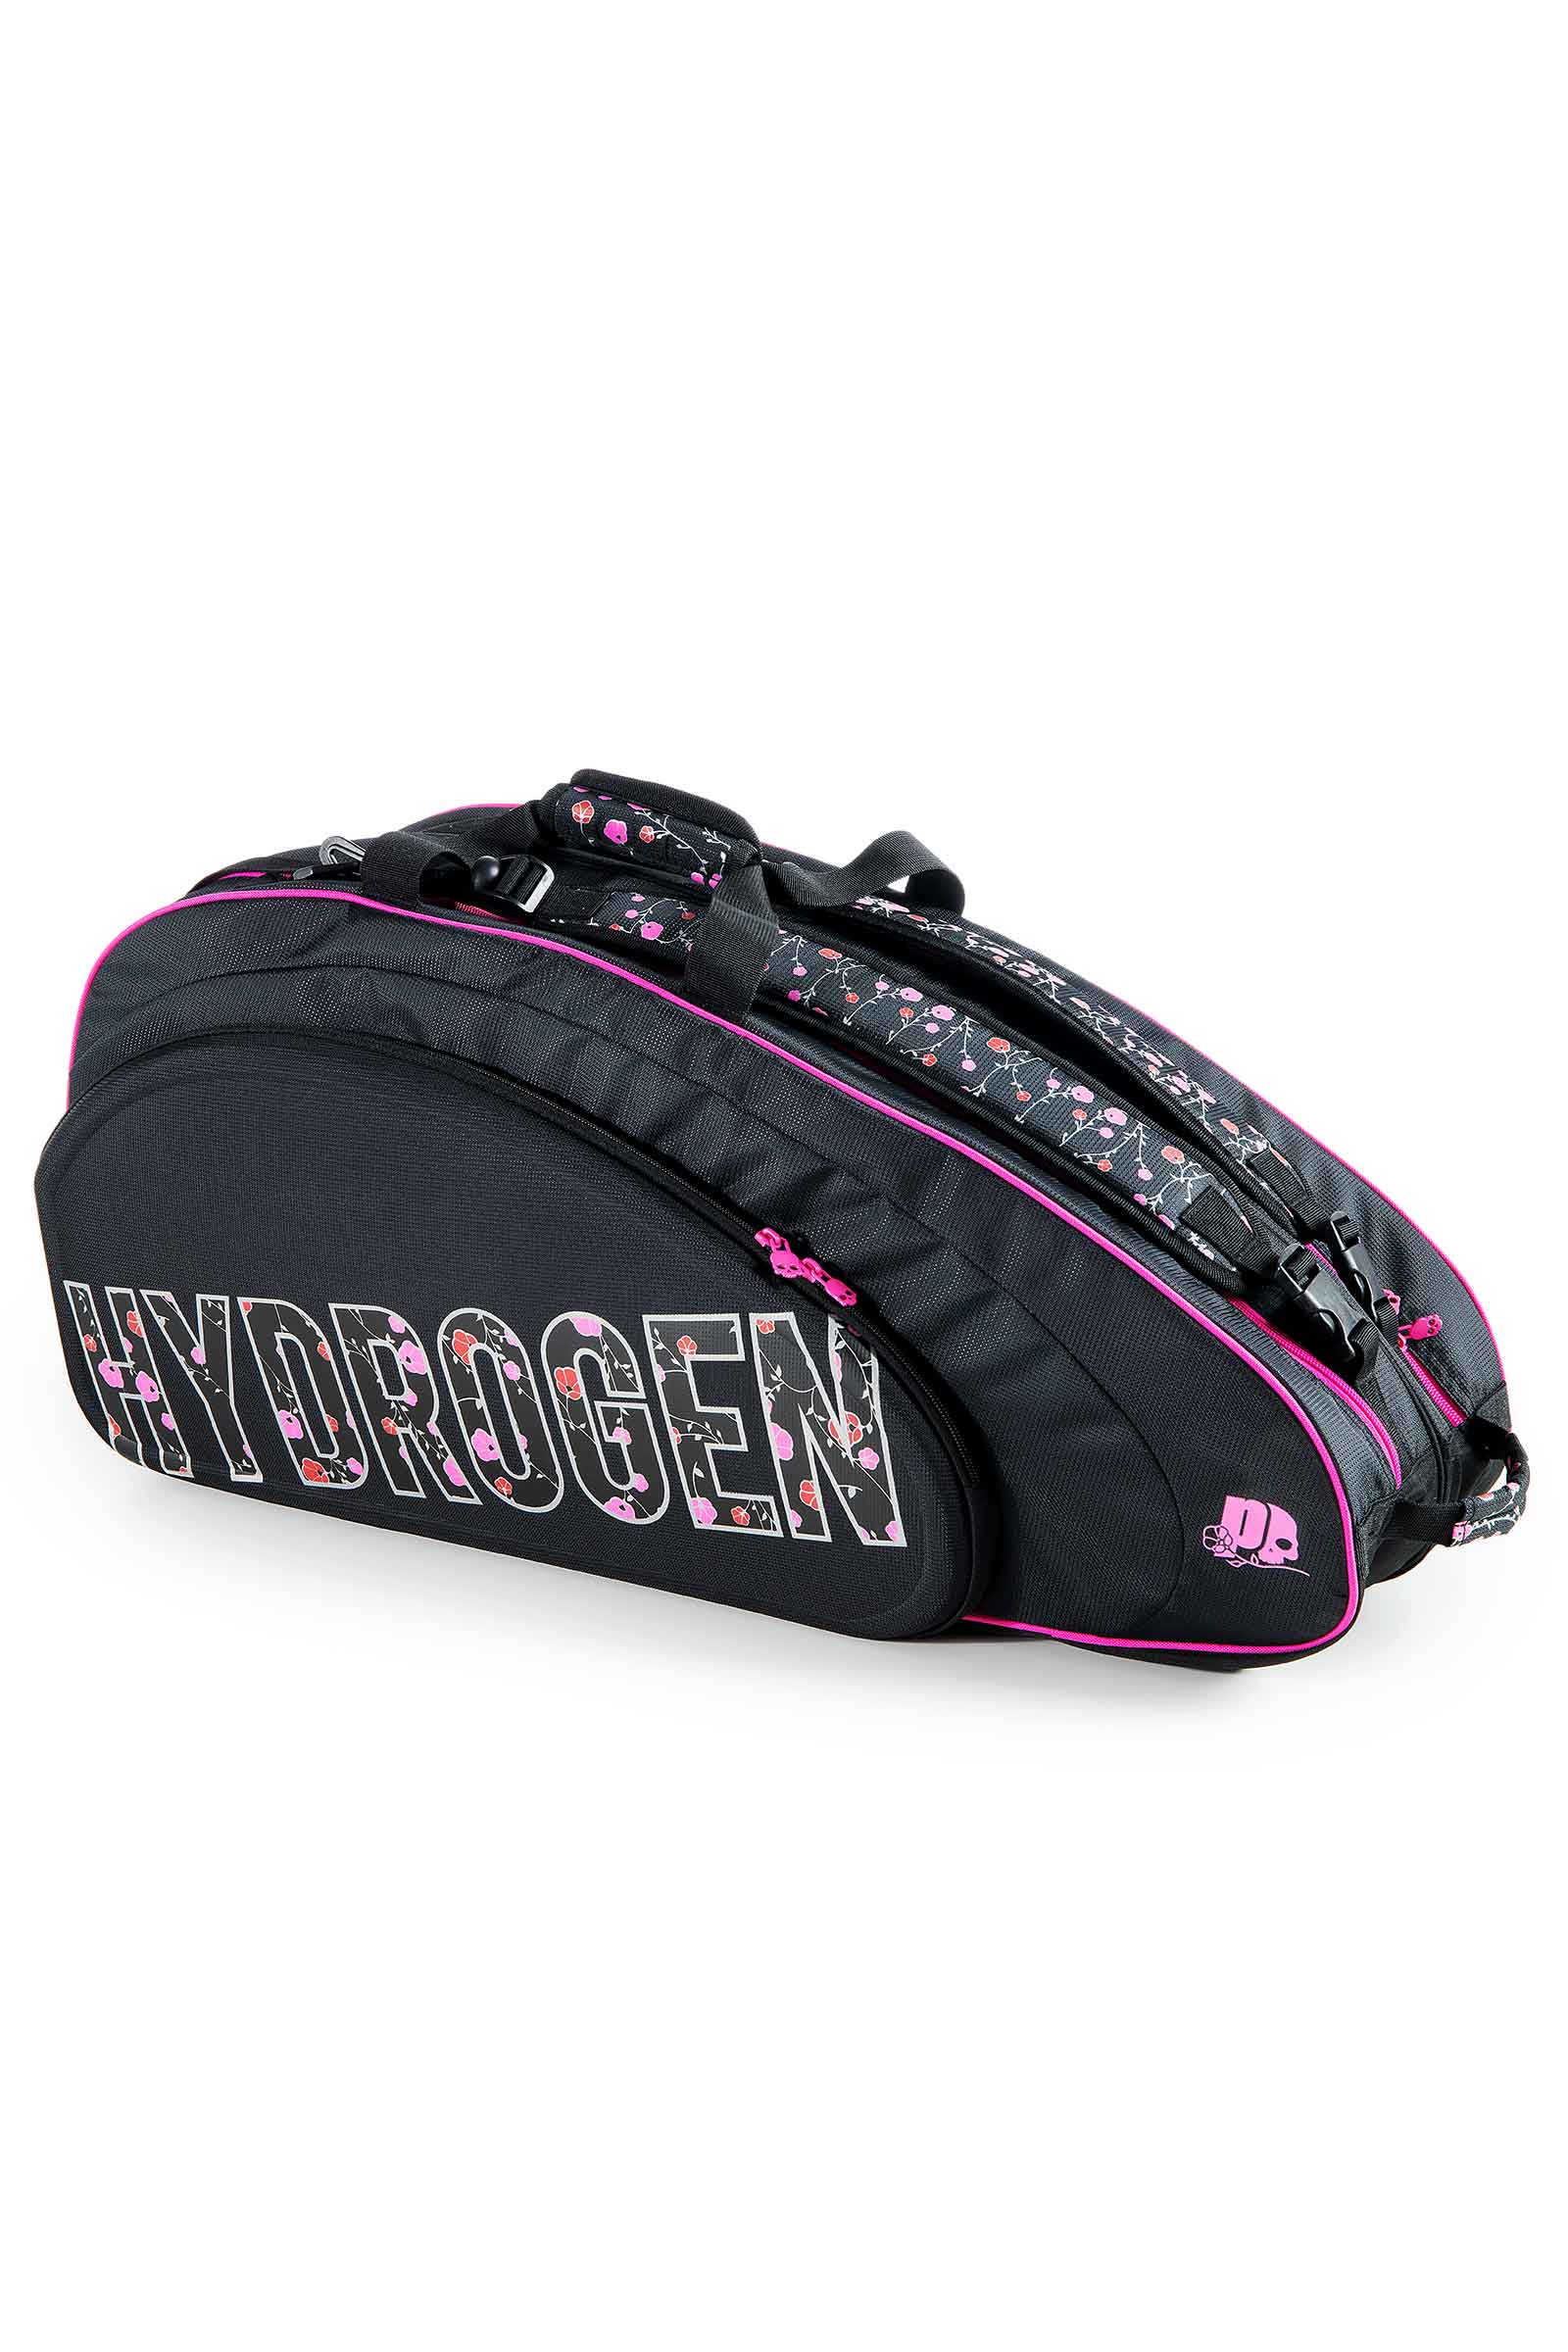 PRİNCE - LADY MARY 6 RACKETS BAG PRINCE BY HYDROGEN